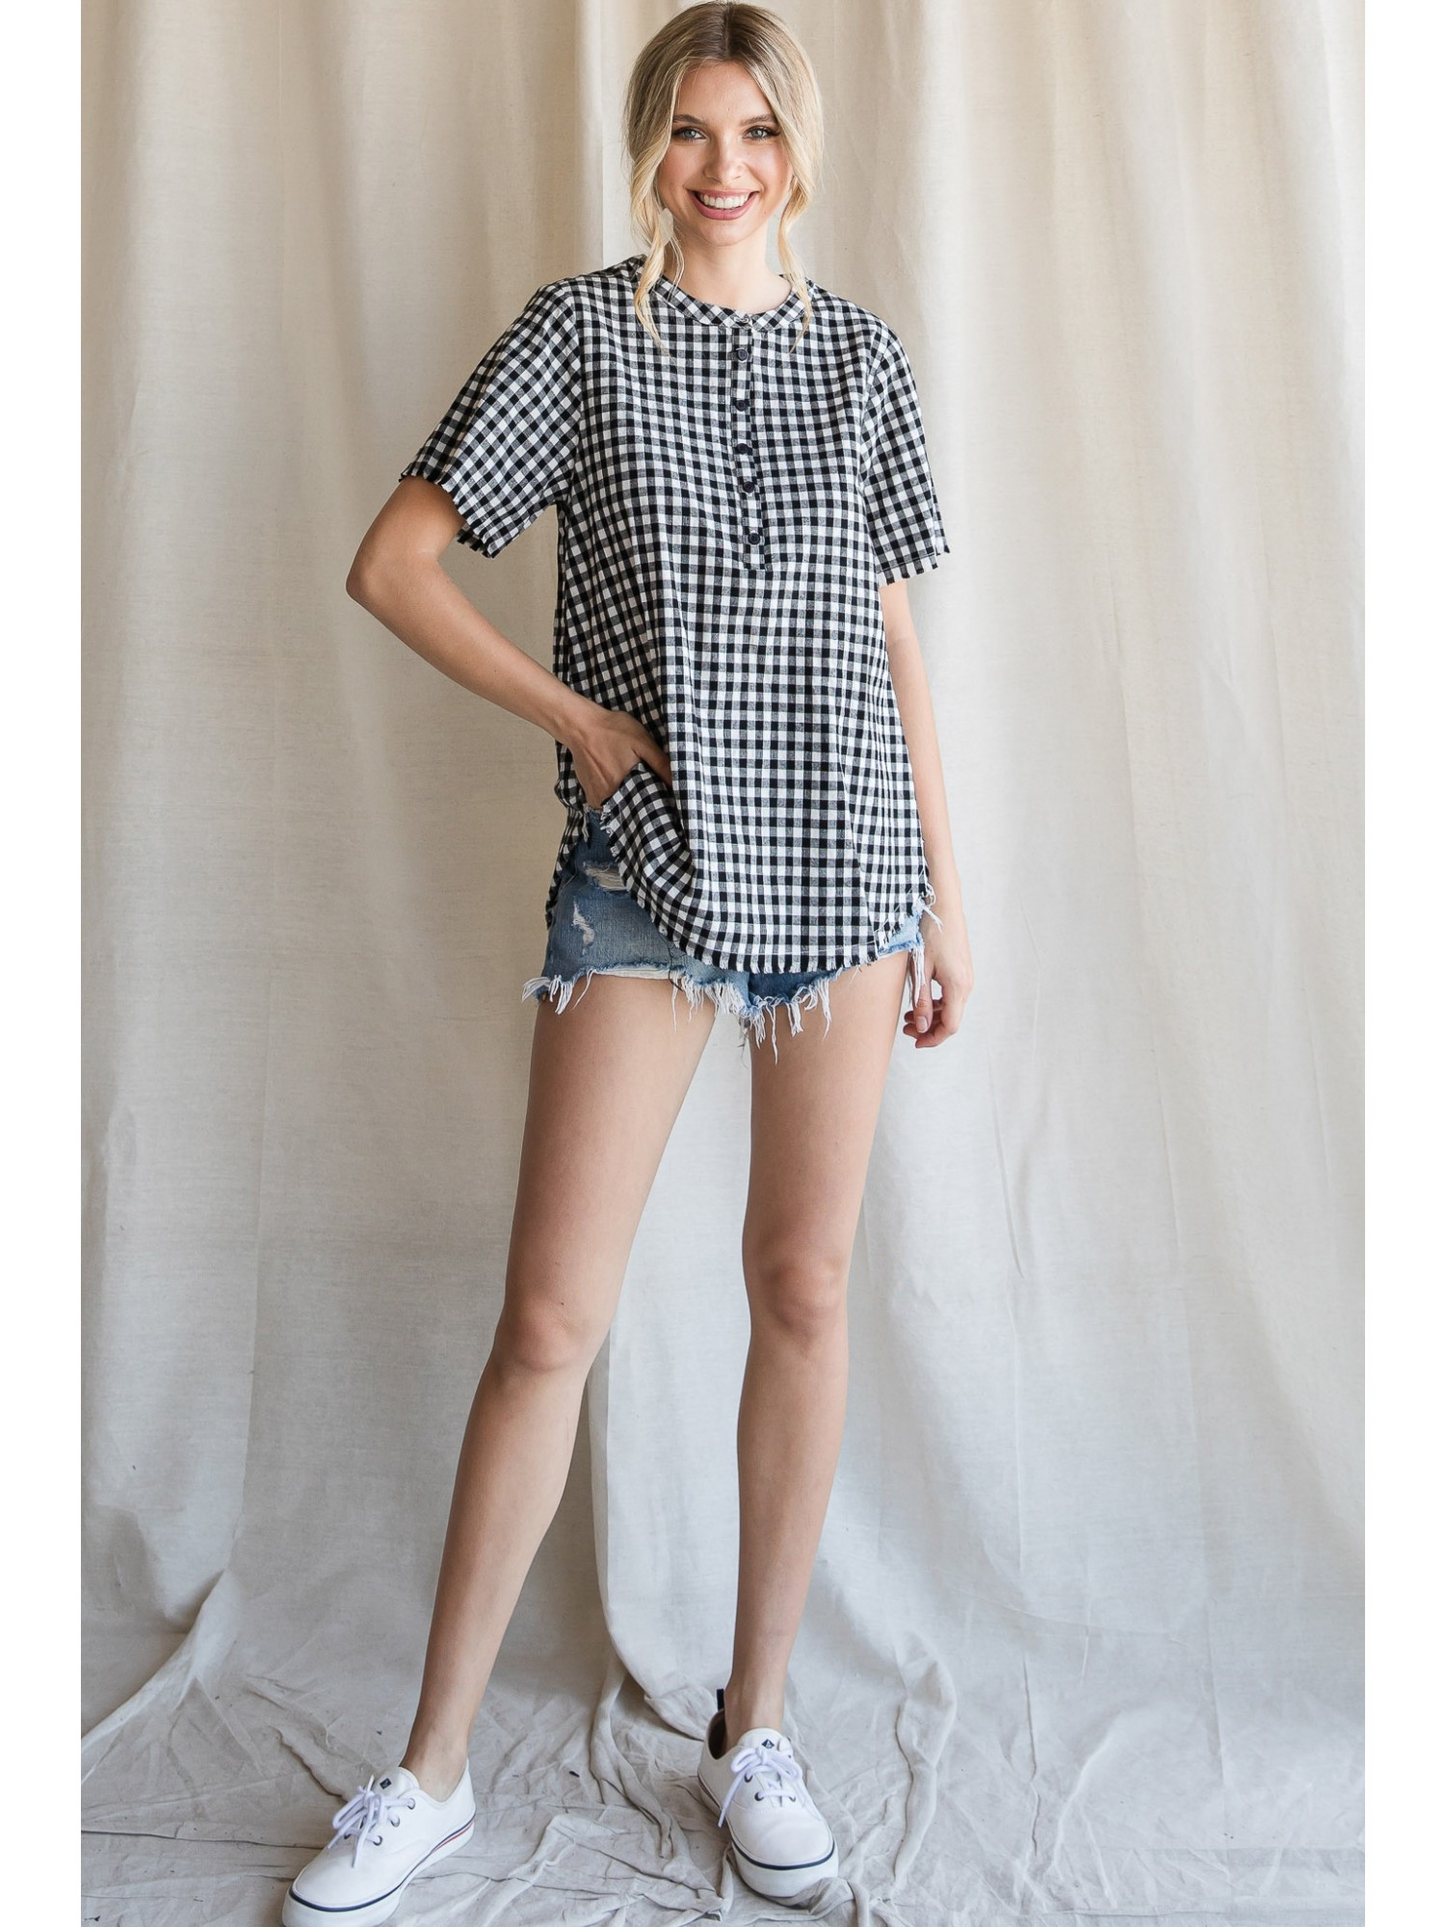 Gingham Delight Cotton Top